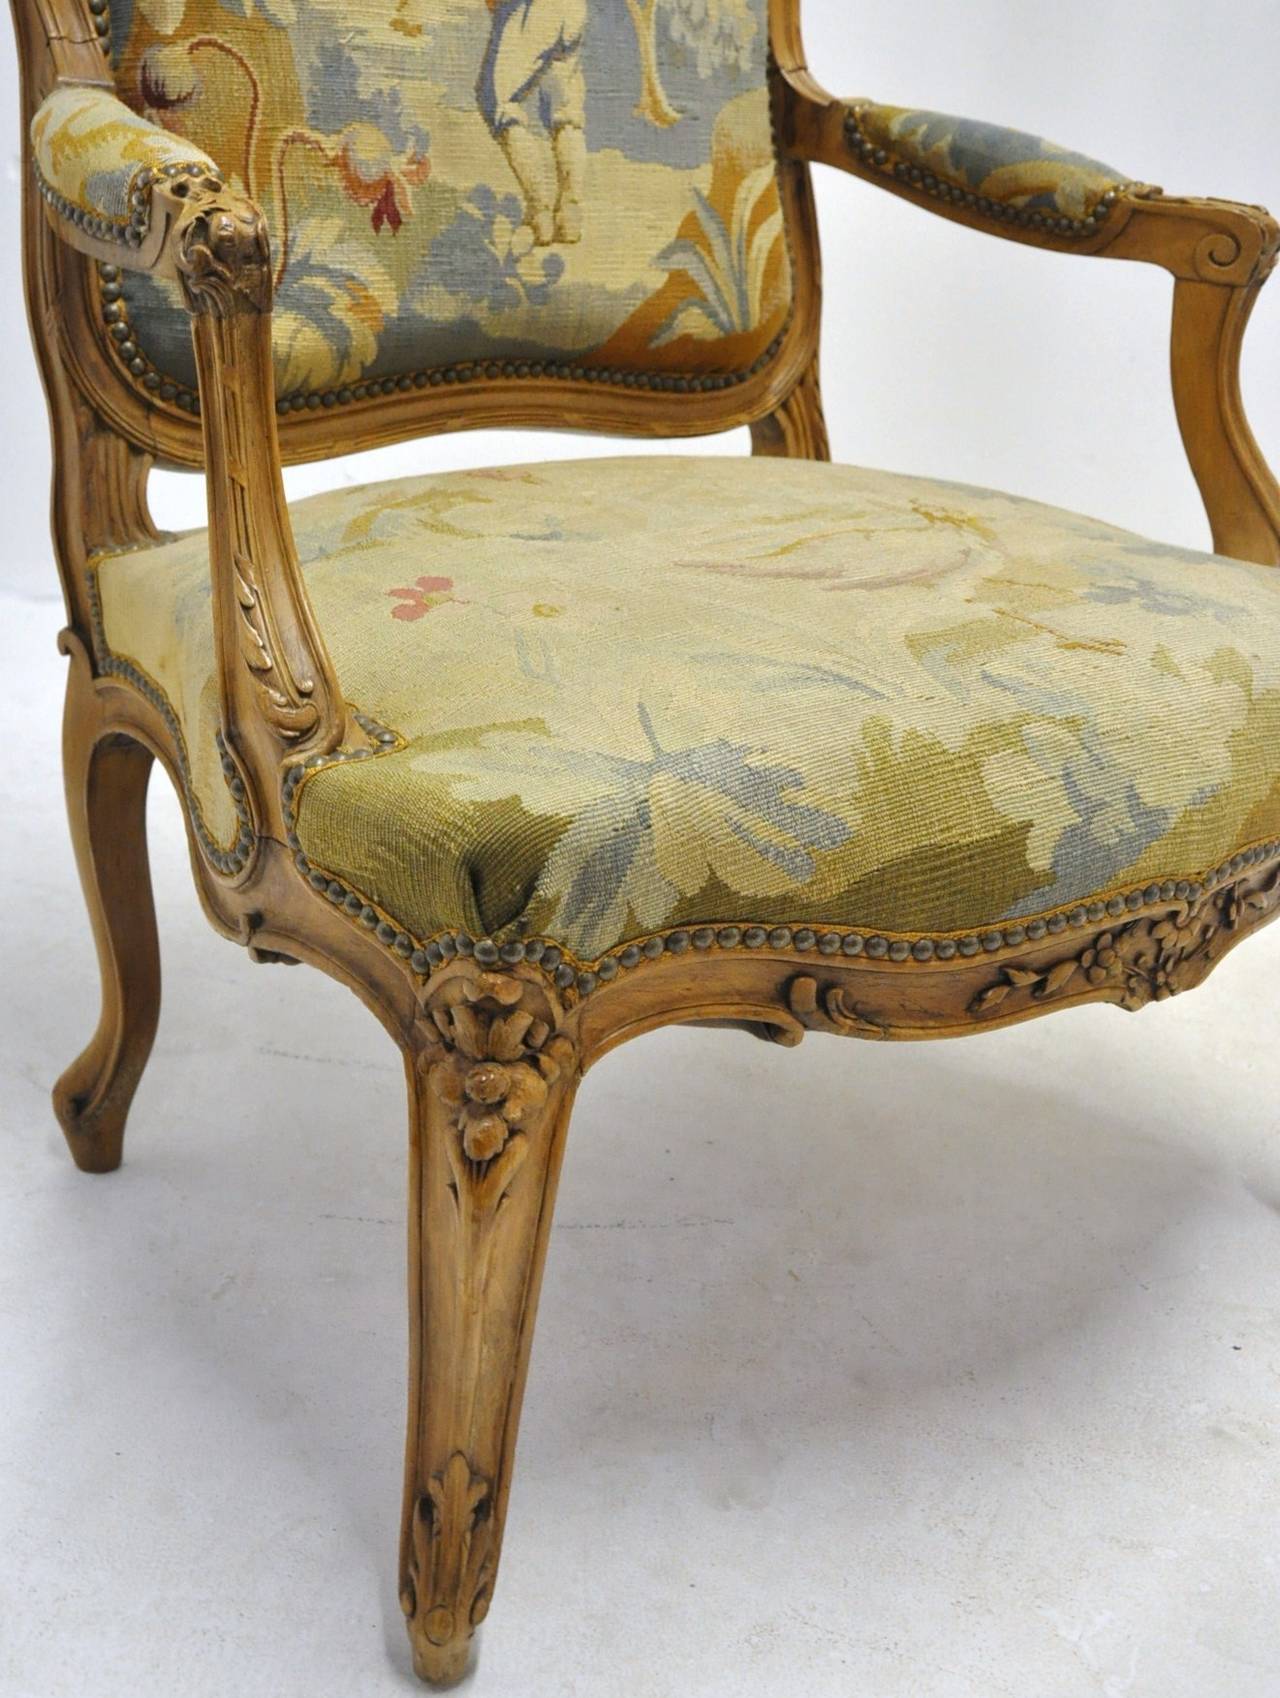 Three-Piece Antique Louis XV Salon Seating Set with Aubusson Tapestry 1